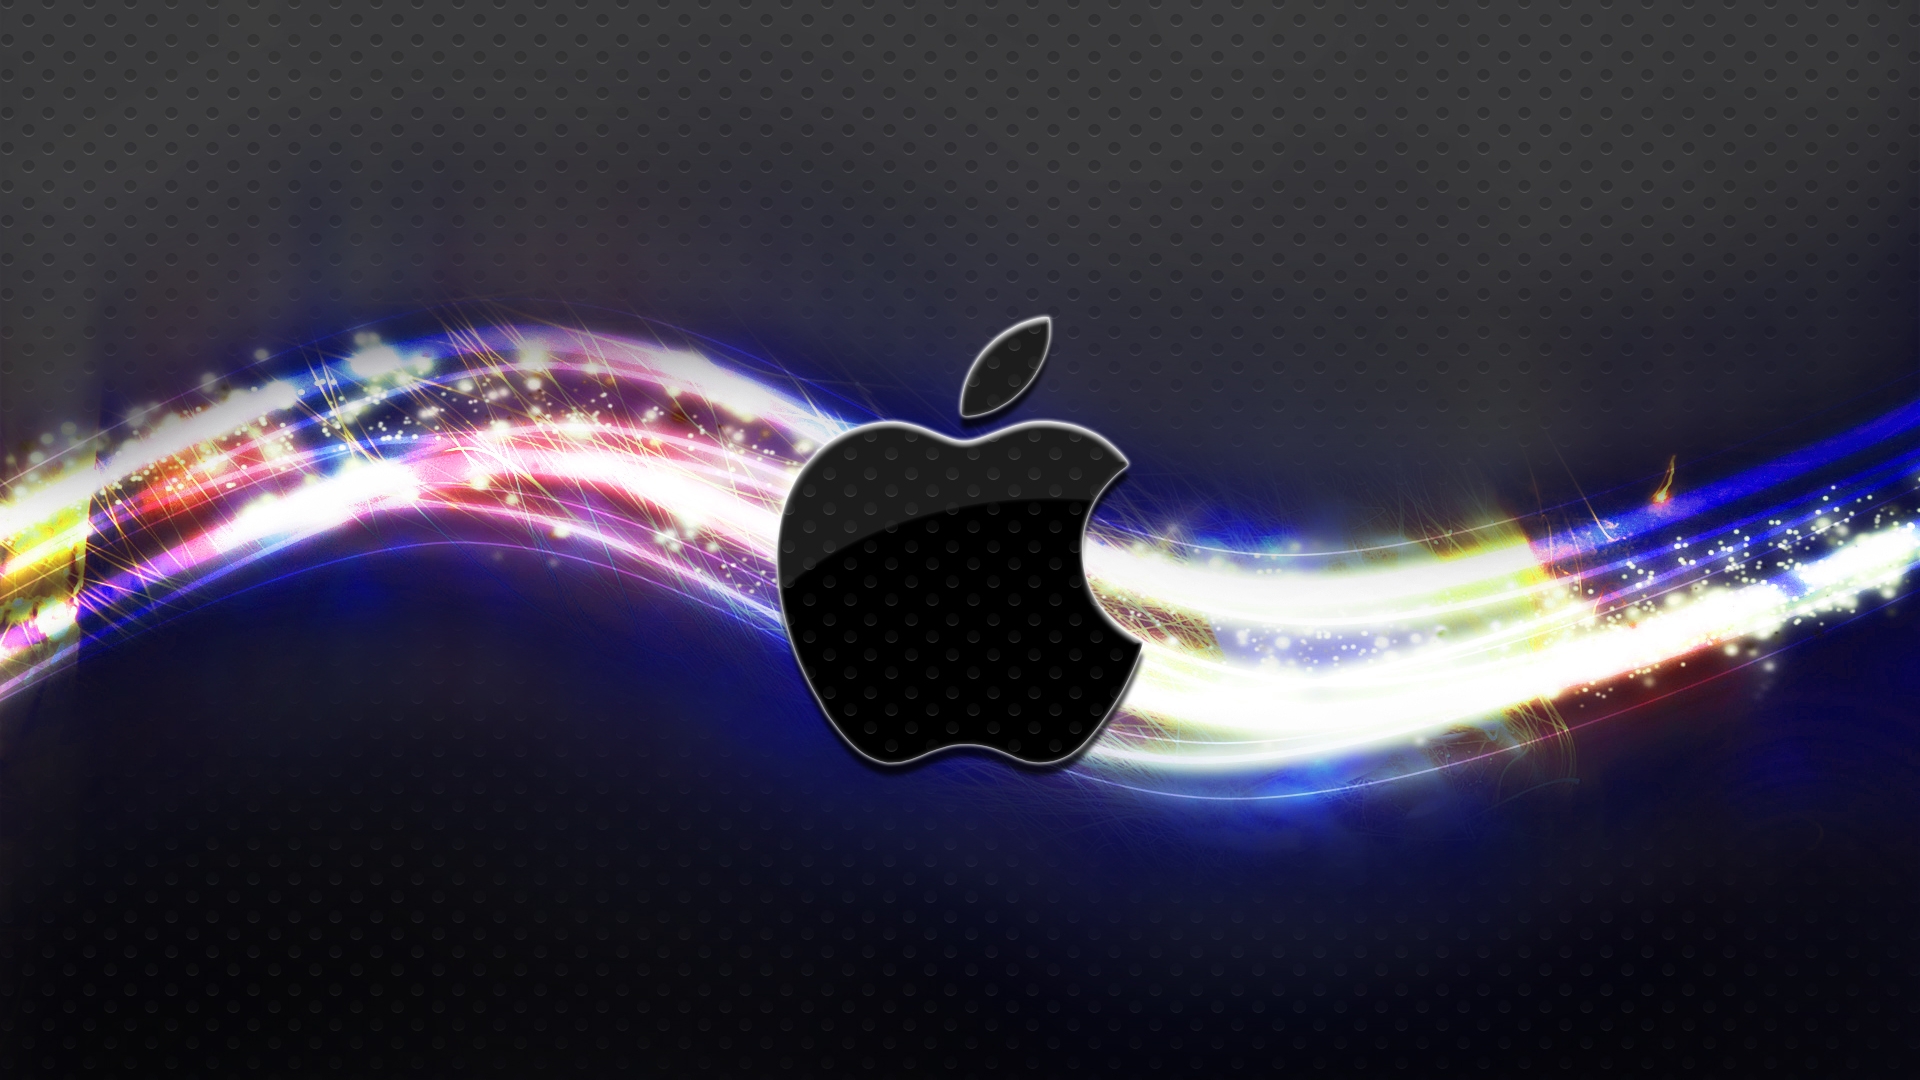 Colorful Apple OS X wallpaper - High Definition, High ...